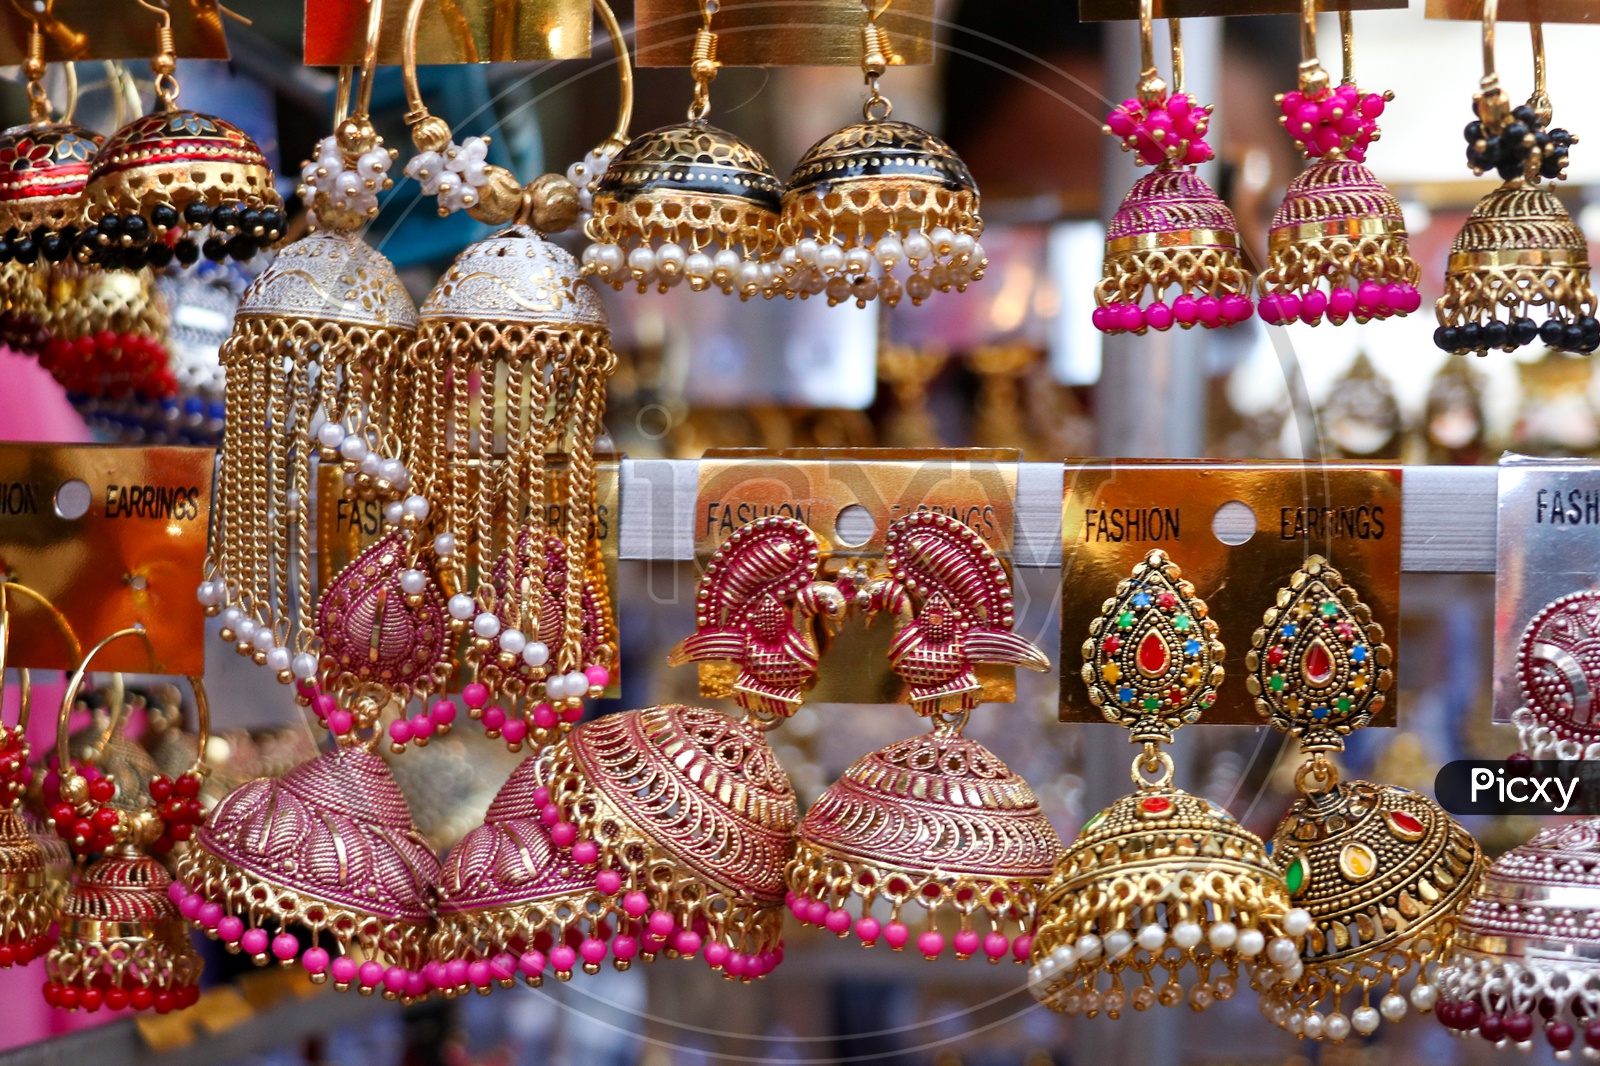 Ear Rings Jewelery In Display At a Stall